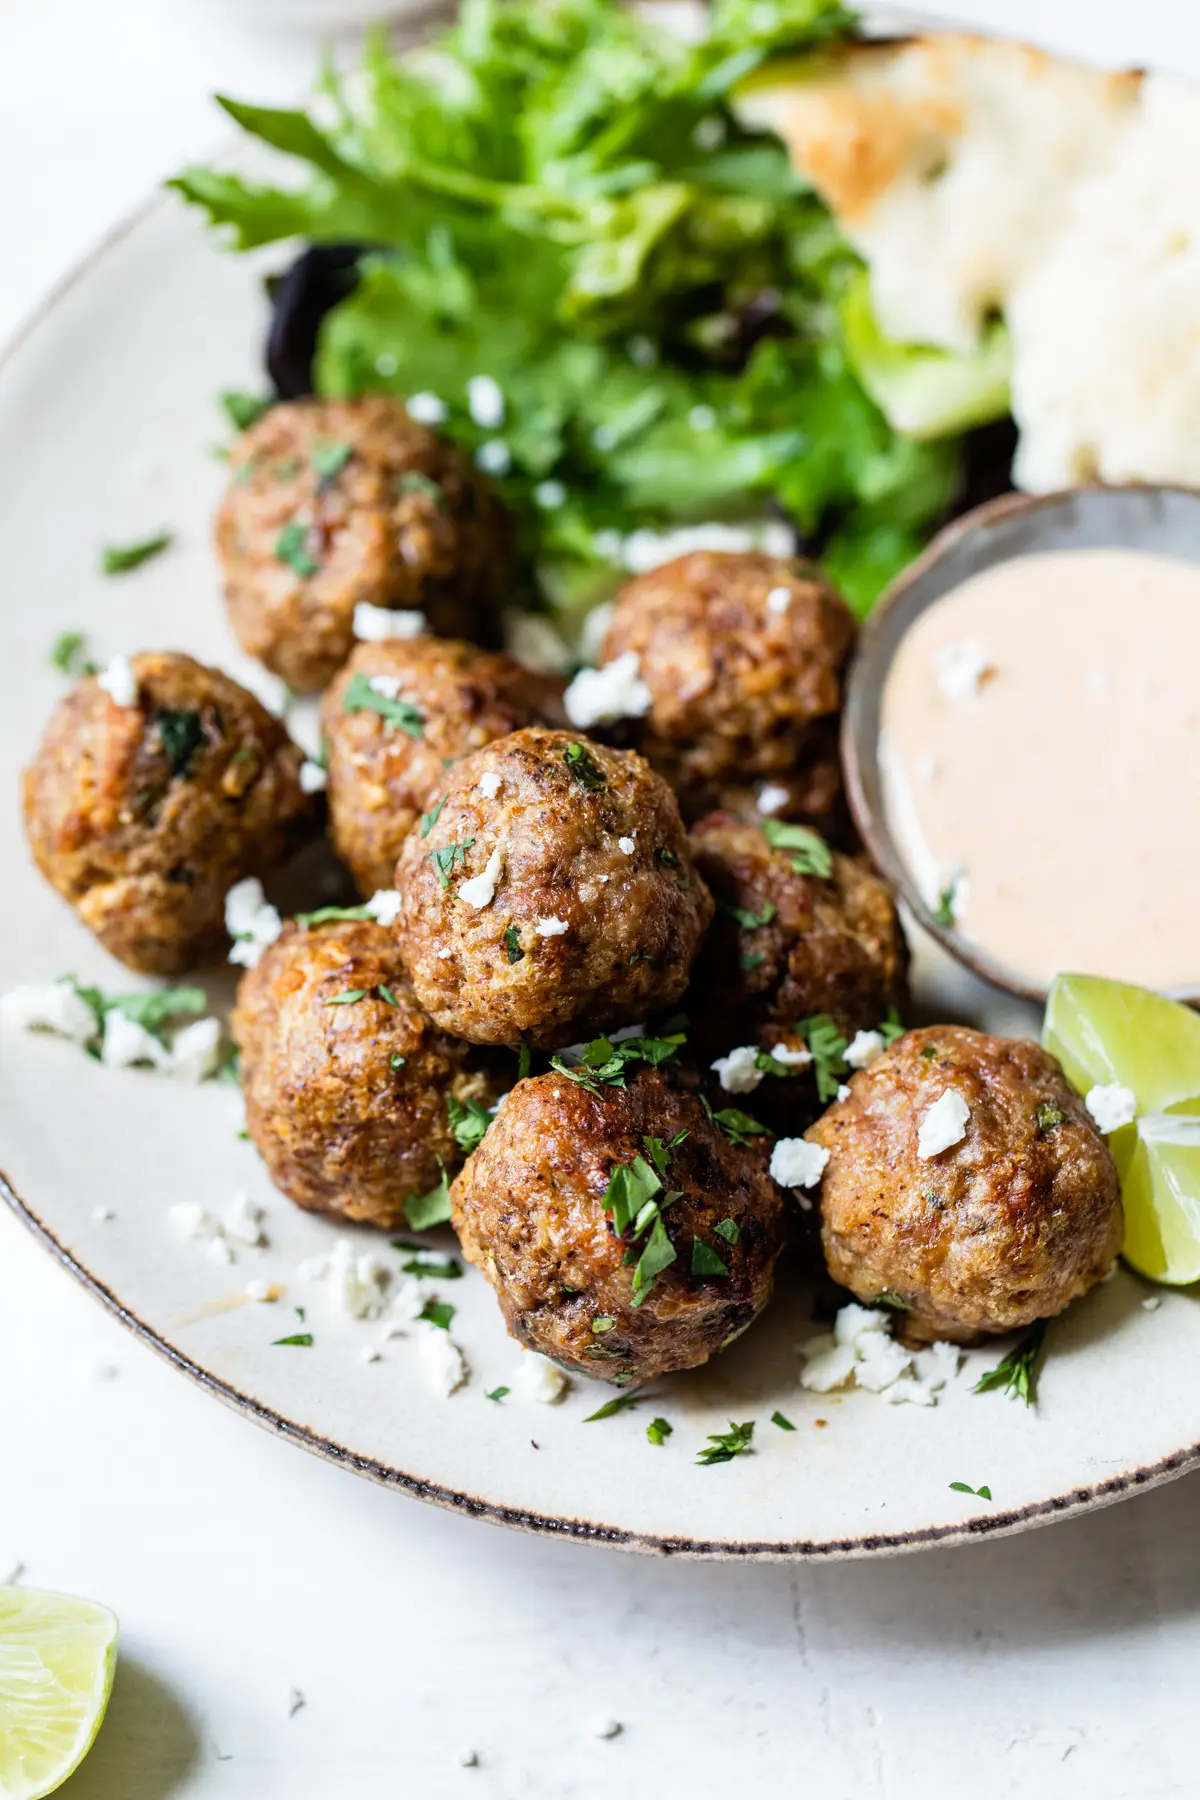 meatballs on a plate with side salad and sauce